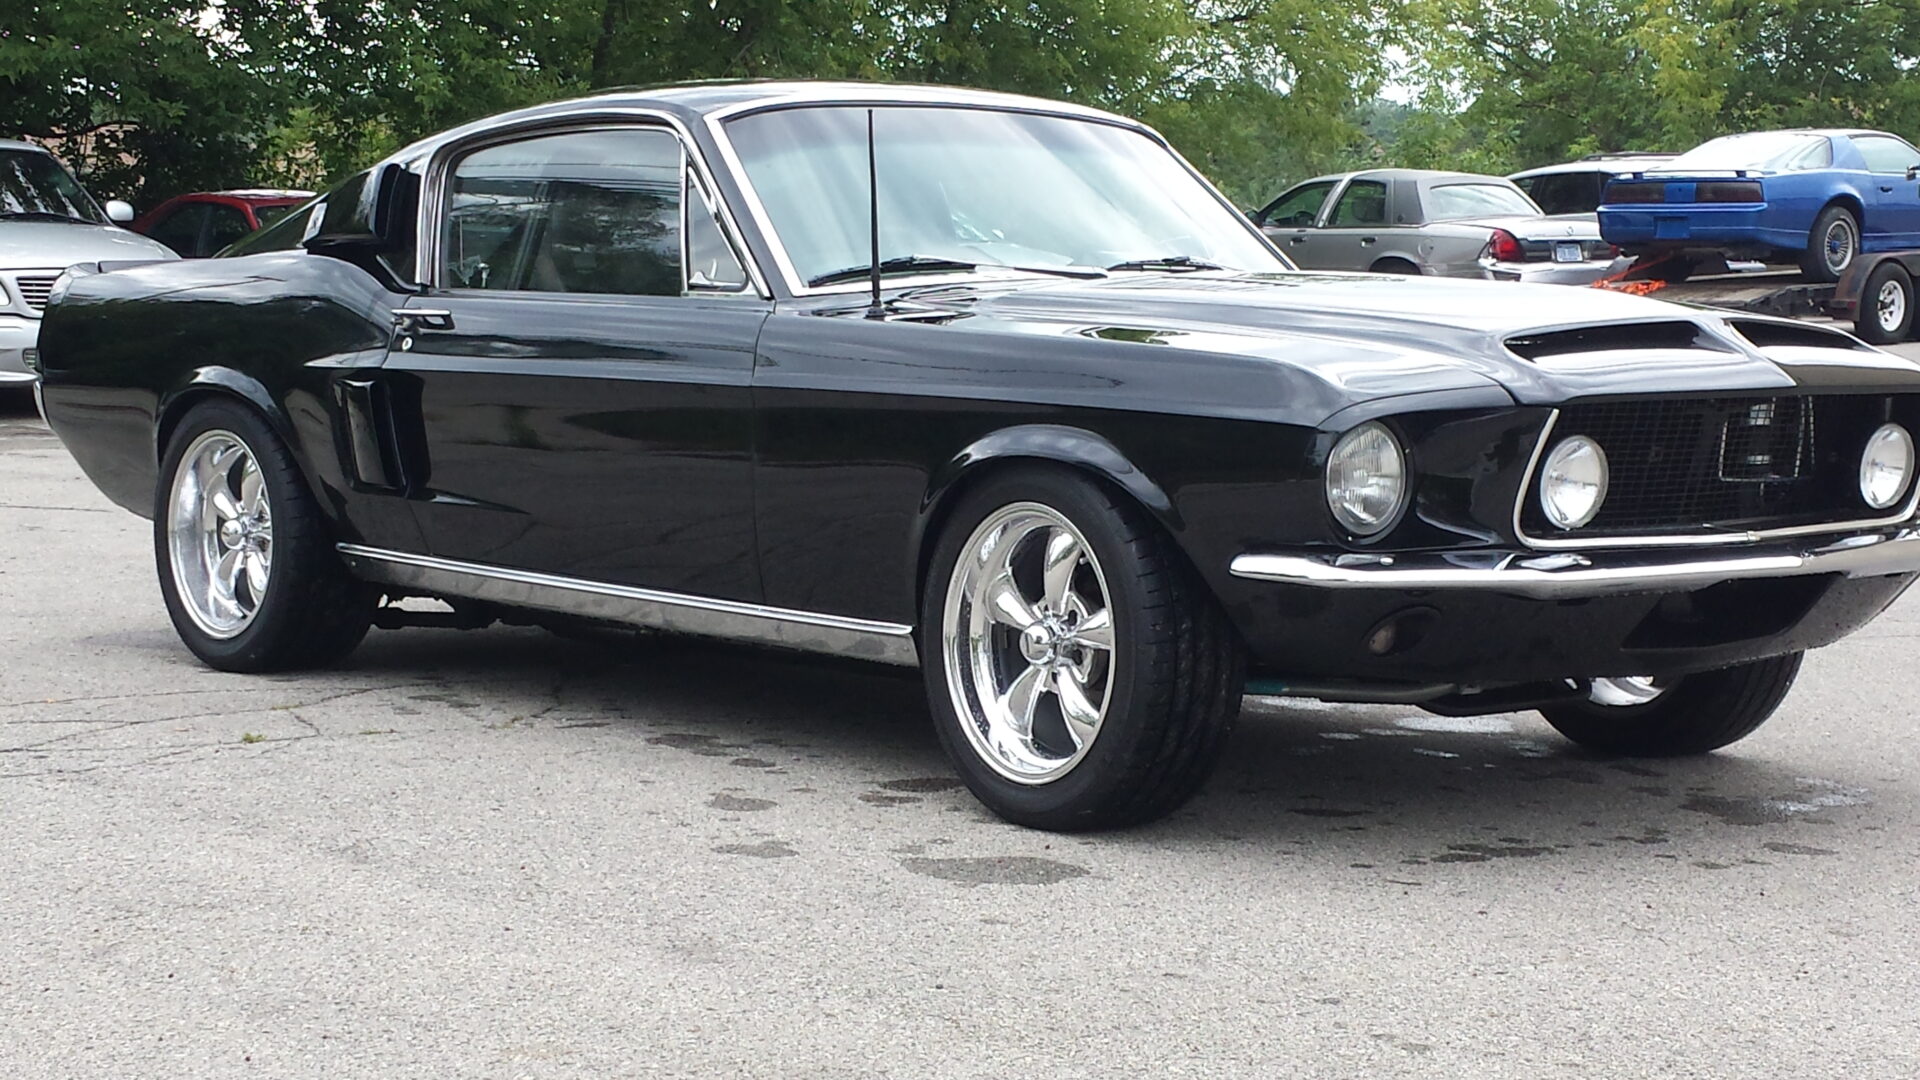 A completed 1967 Ford Mustang Fastback